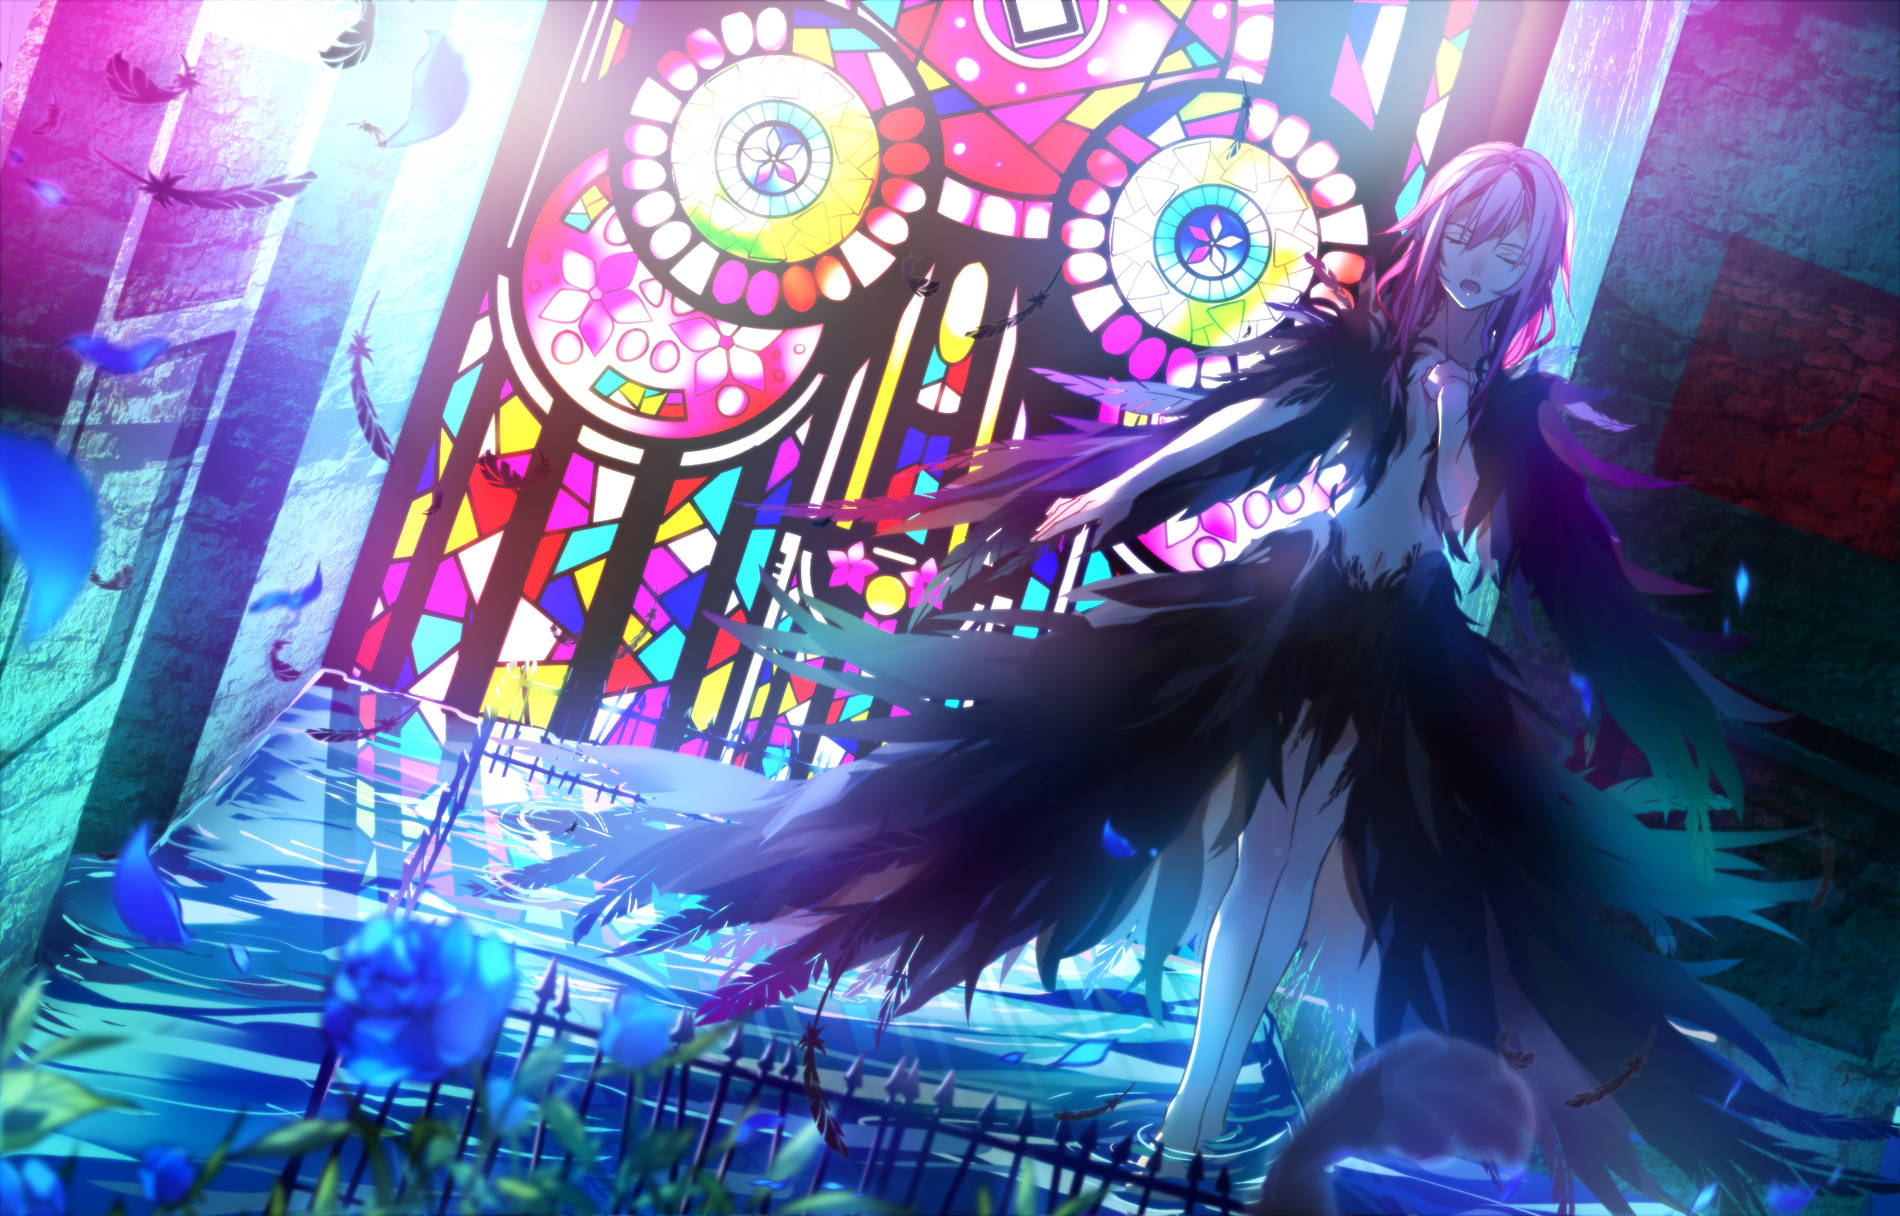 Guilty Crown Inori In Feathery Outfit